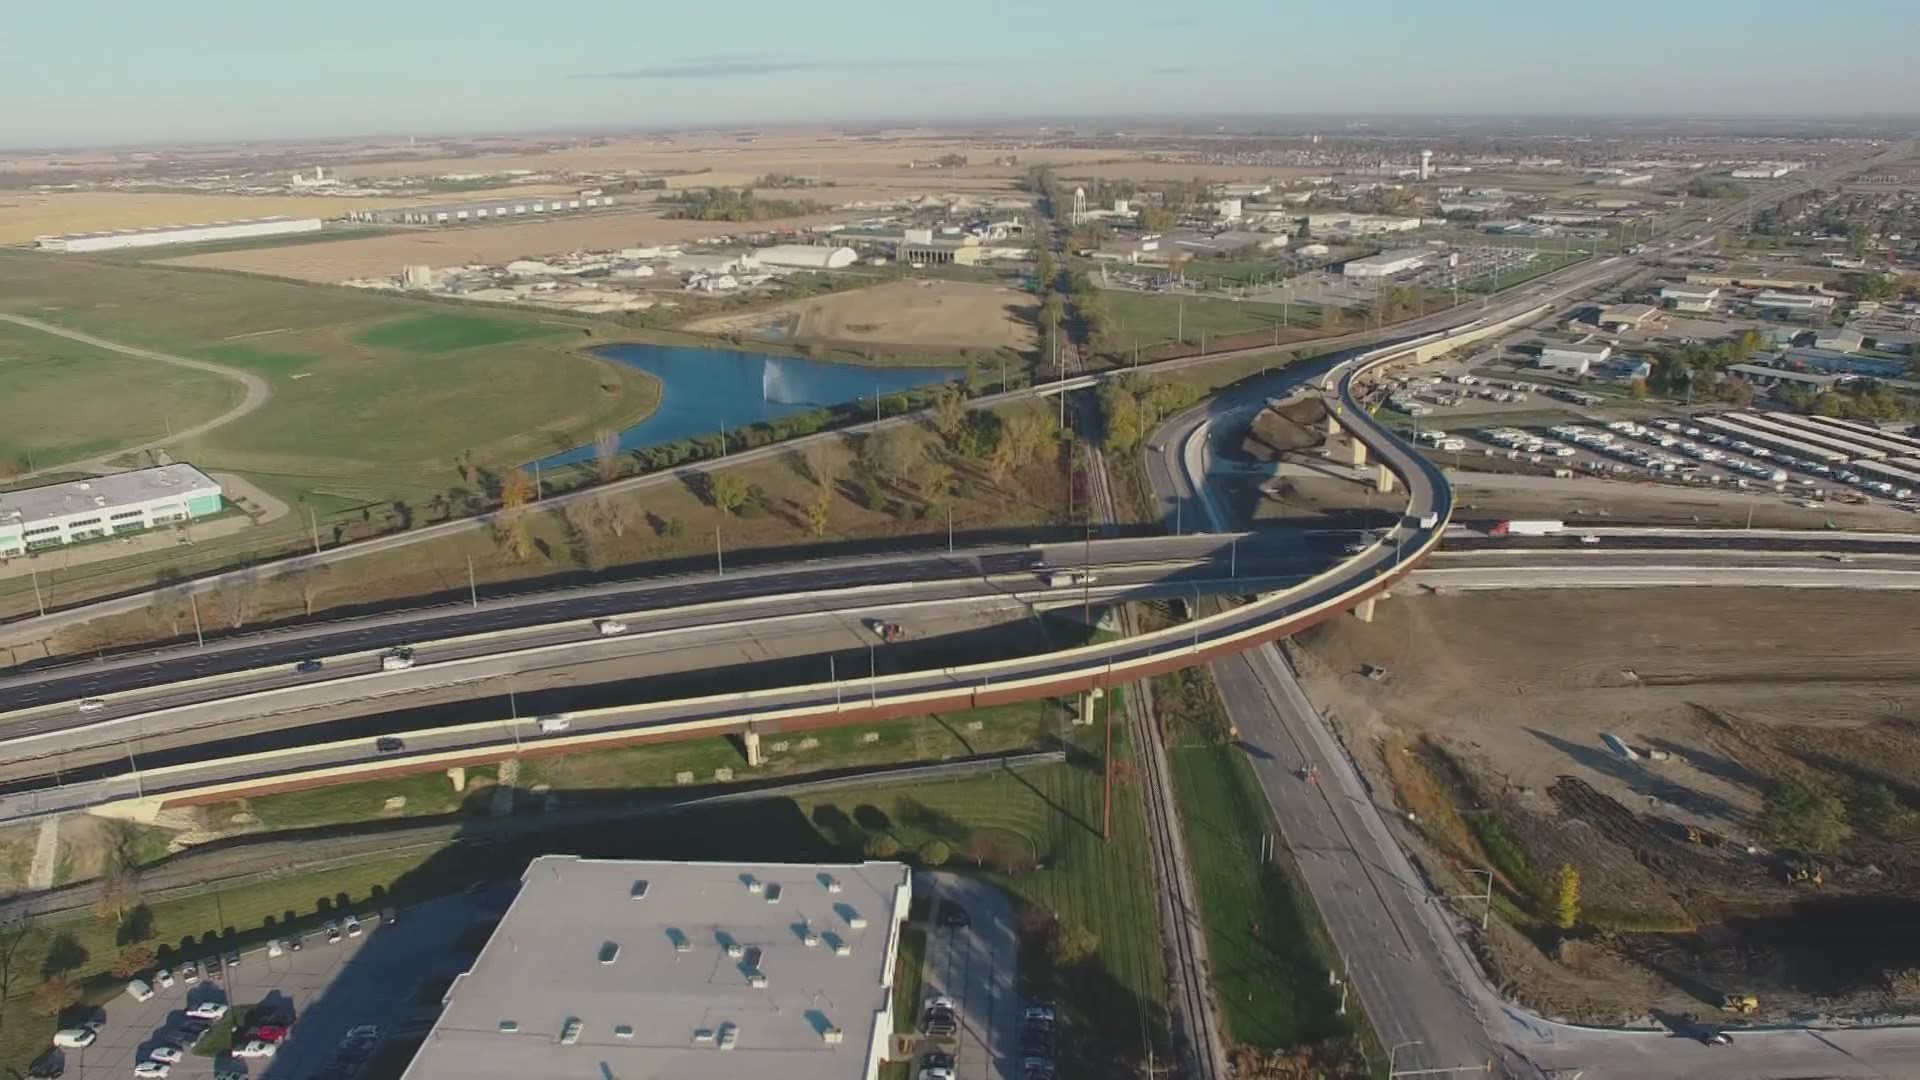 The project started three years ago and cost $65 million to complete.